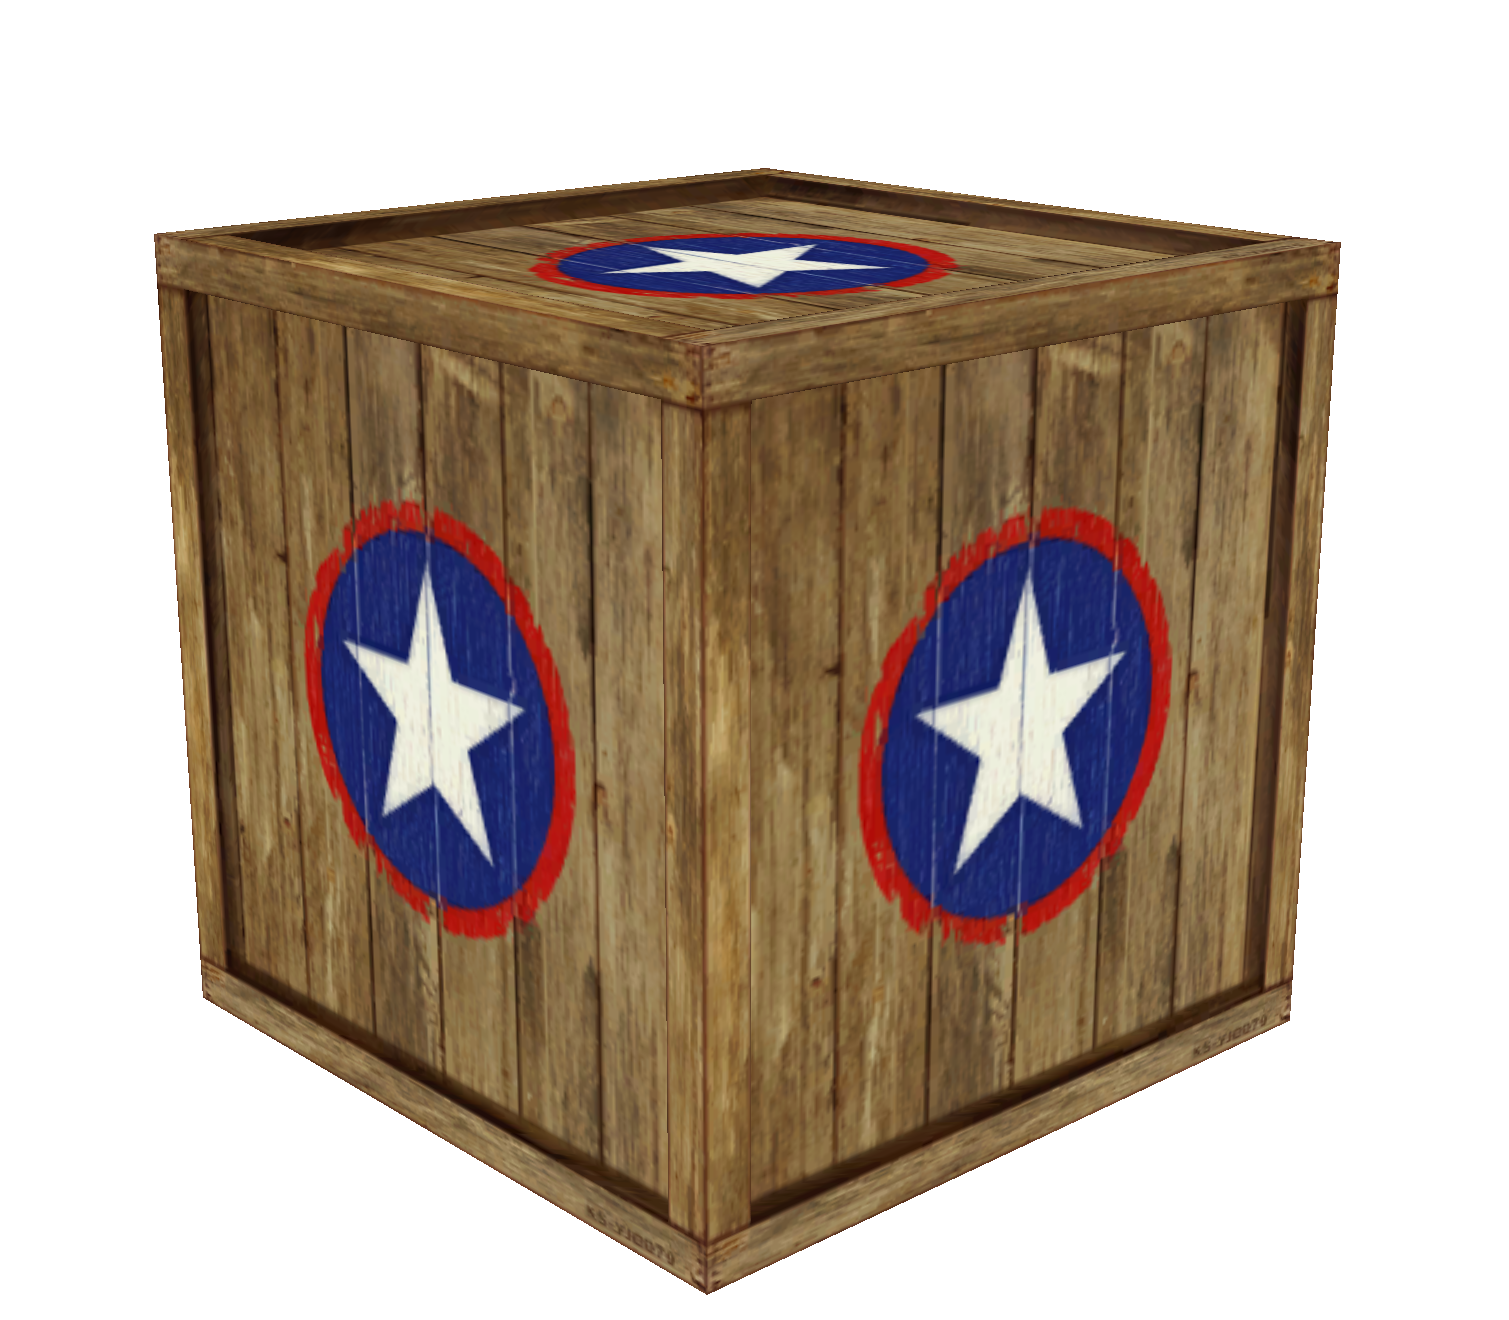 Gold Gift Box PNG